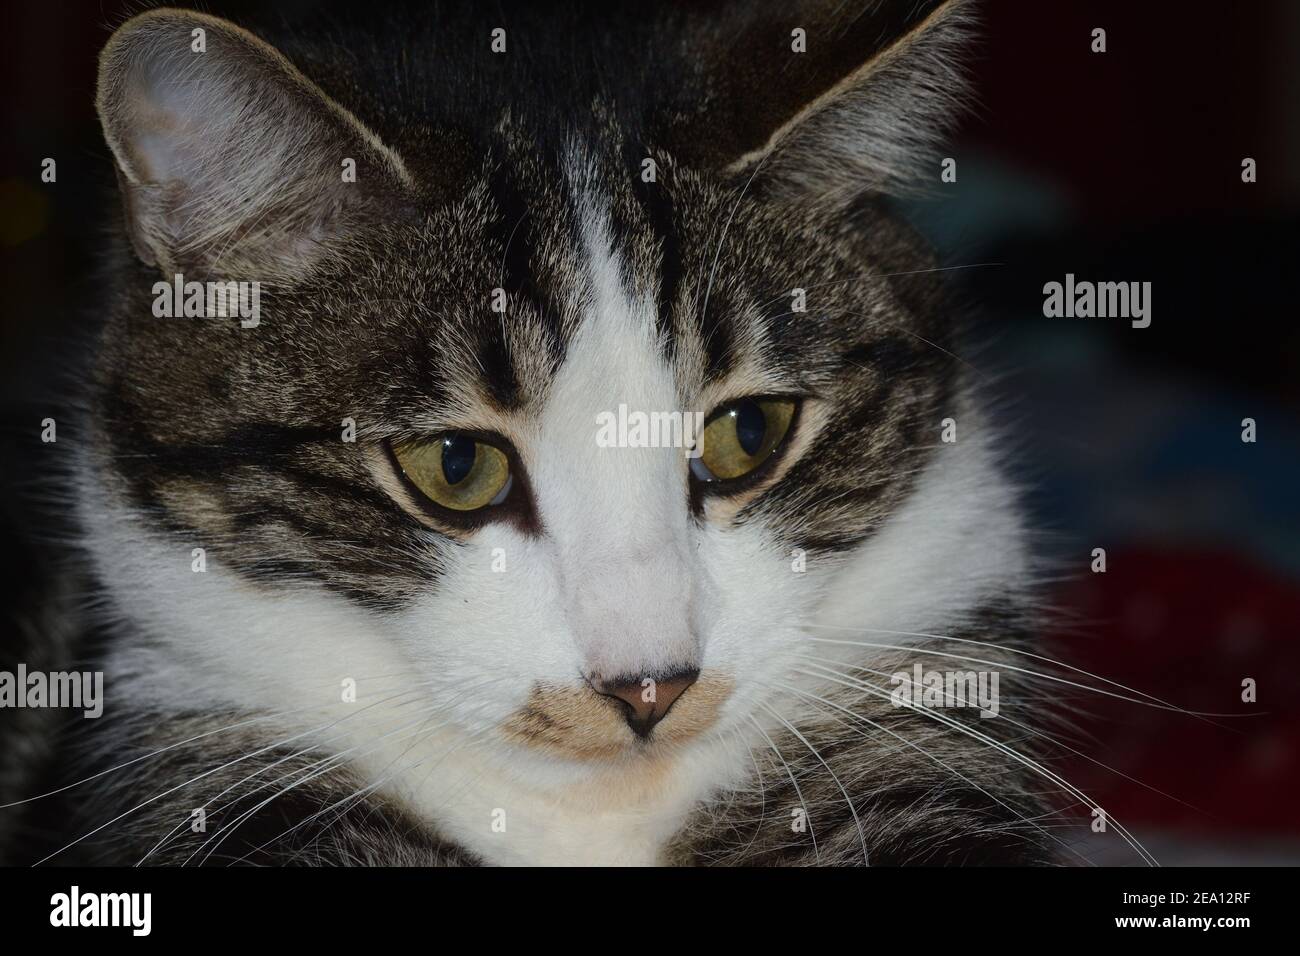 close-up portrait of a striped tabby cat Stock Photo